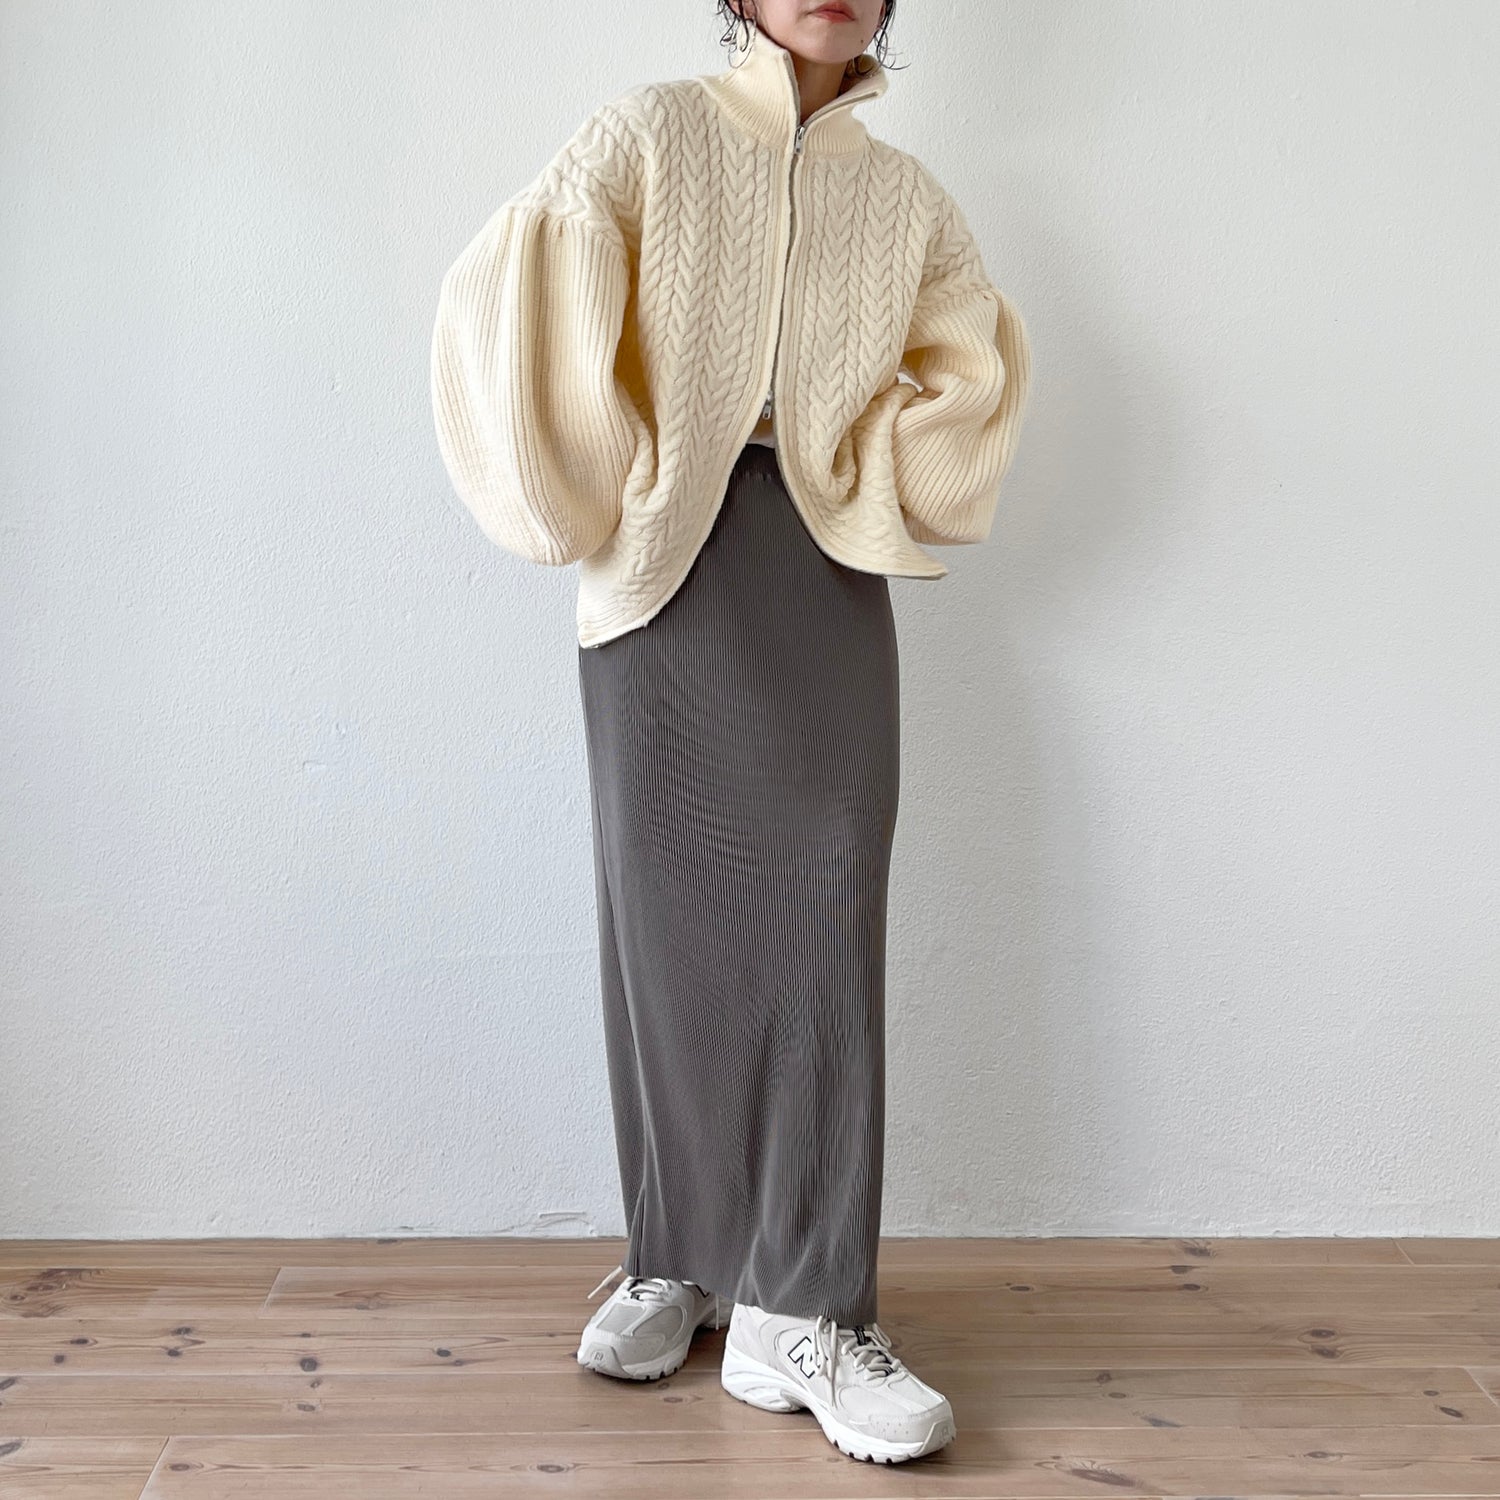 volume sleeve cable knit cardigan / ivory